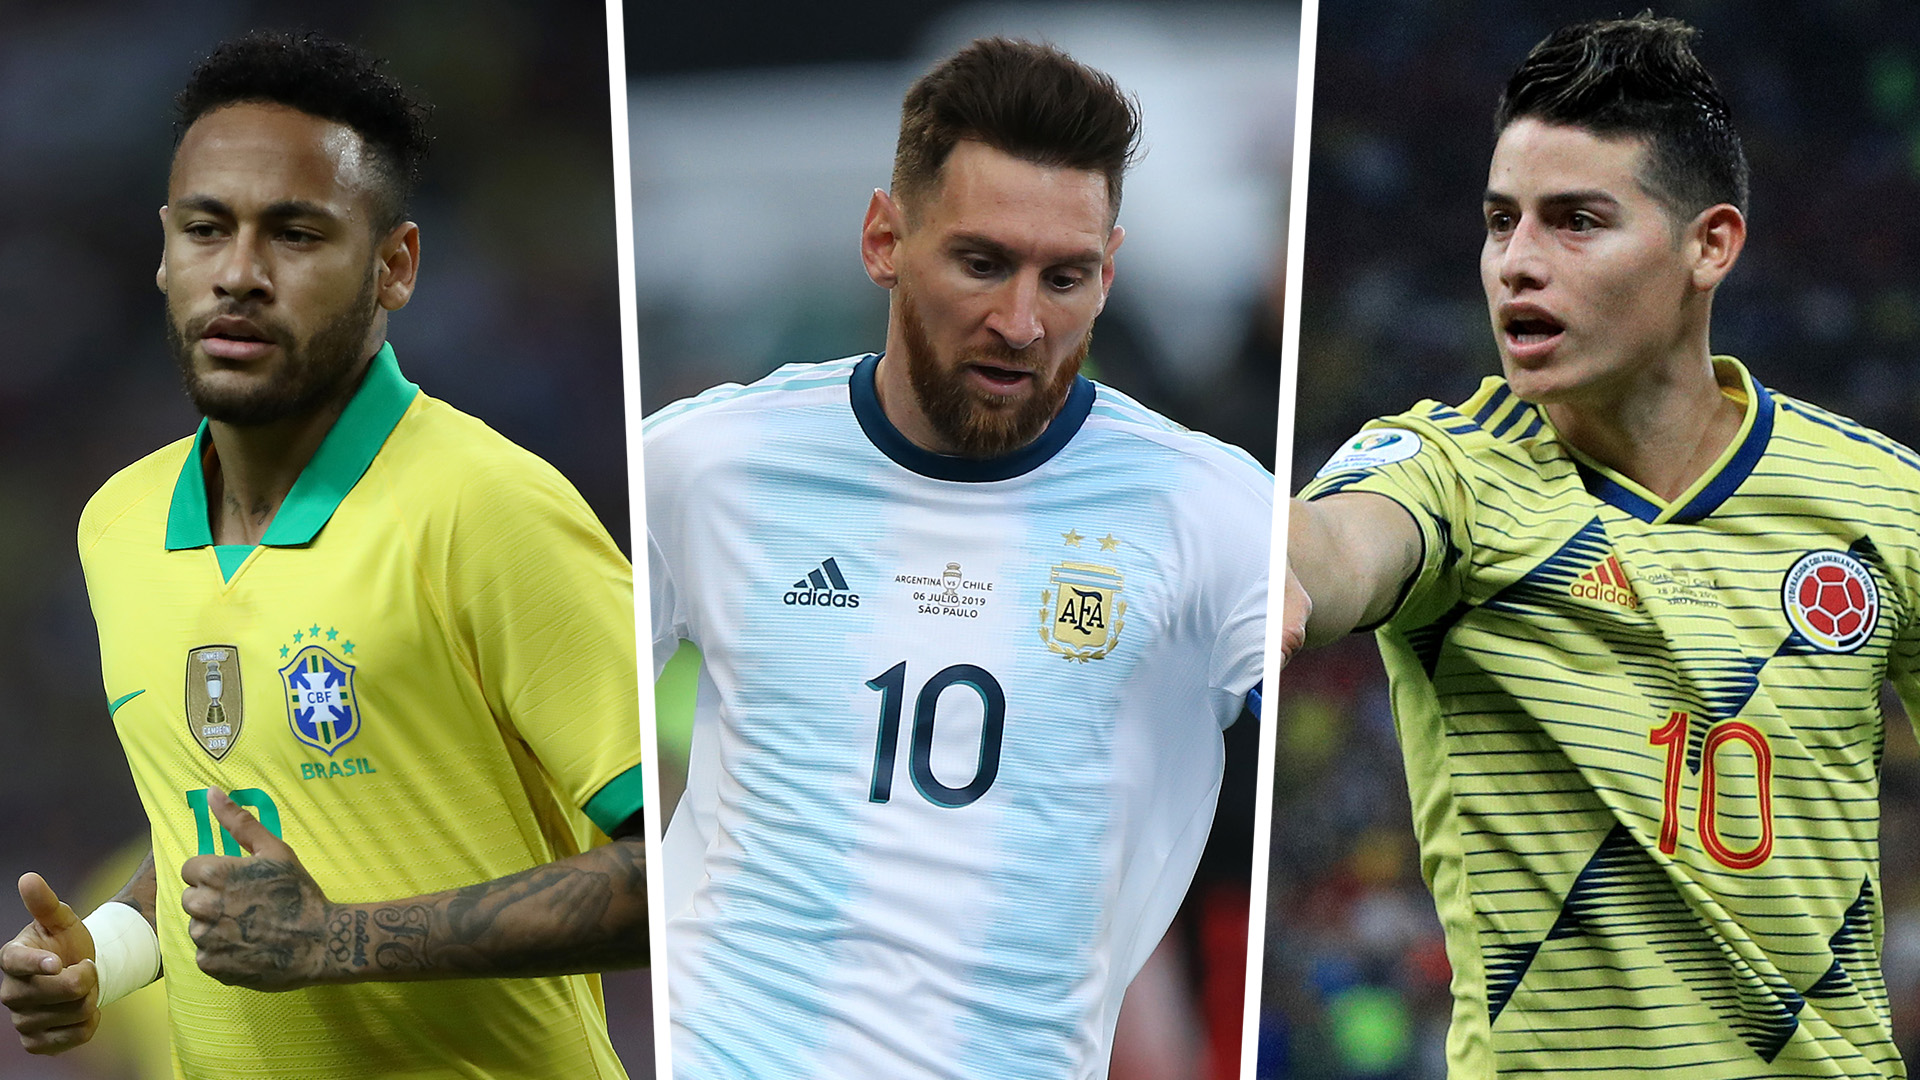 Copa America 2020: Teams, fixtures, results & everything you need to know